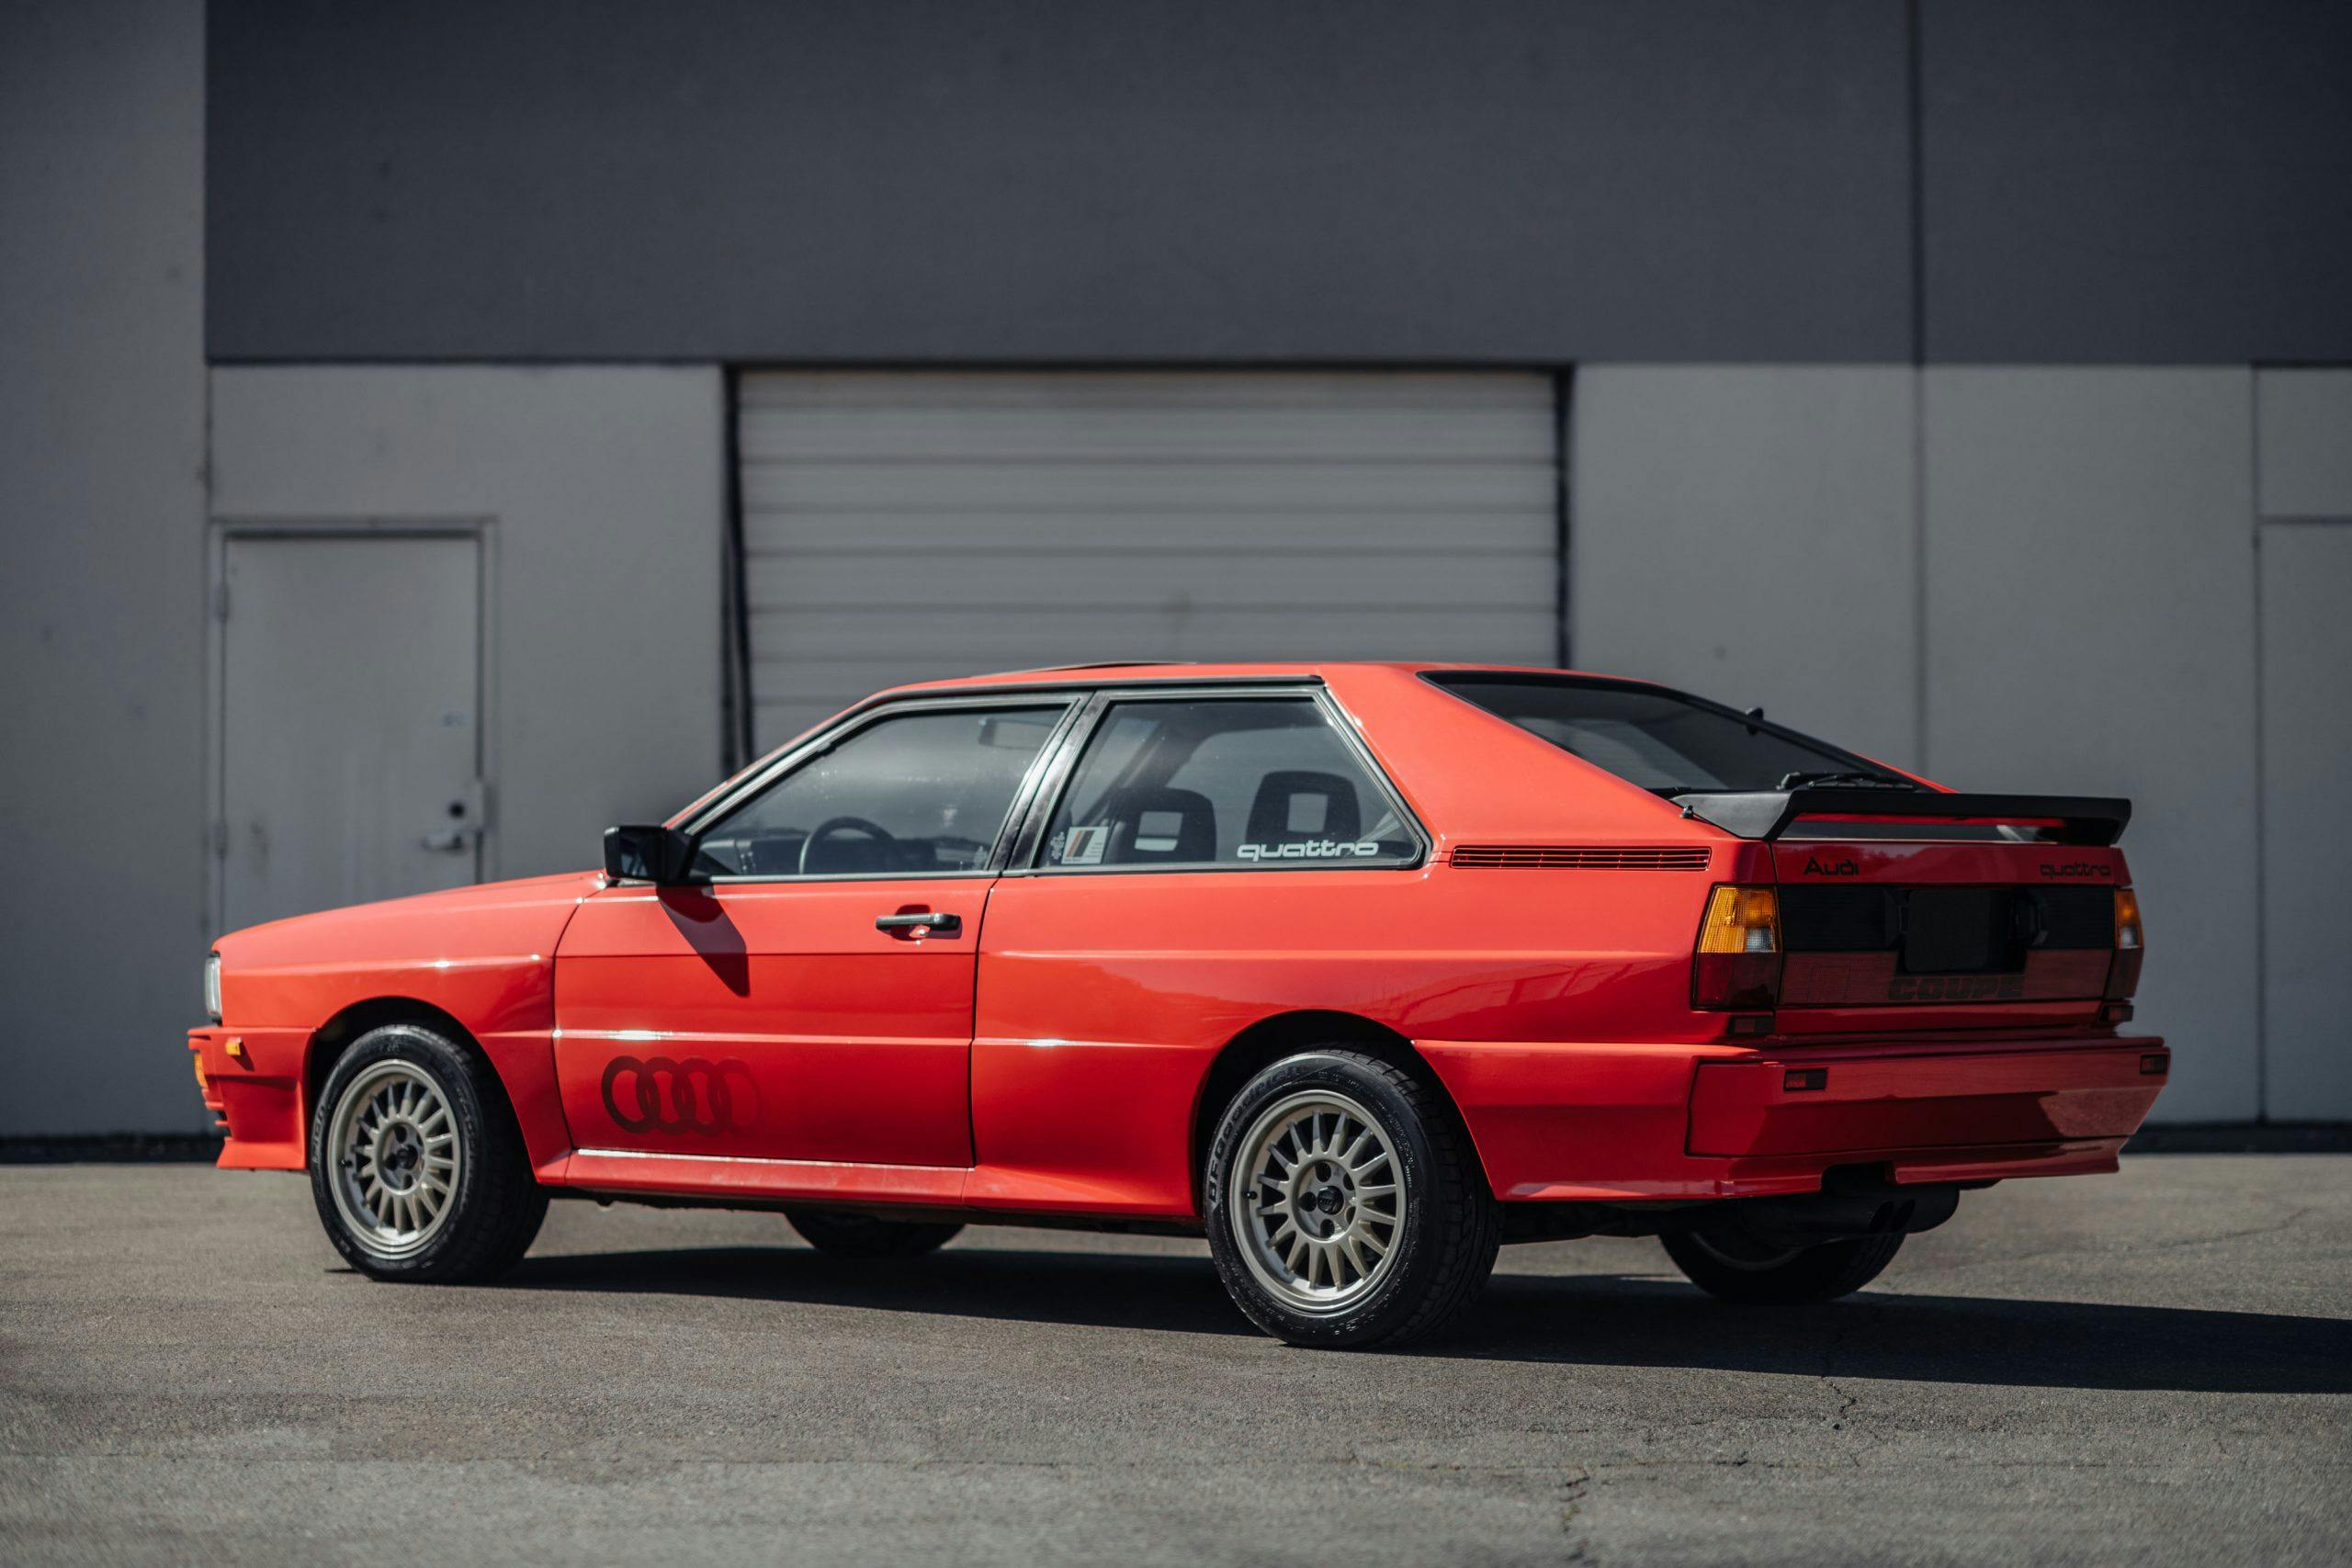 Audi's Ur-Quattro, trend-setter on the rally stage and street, is